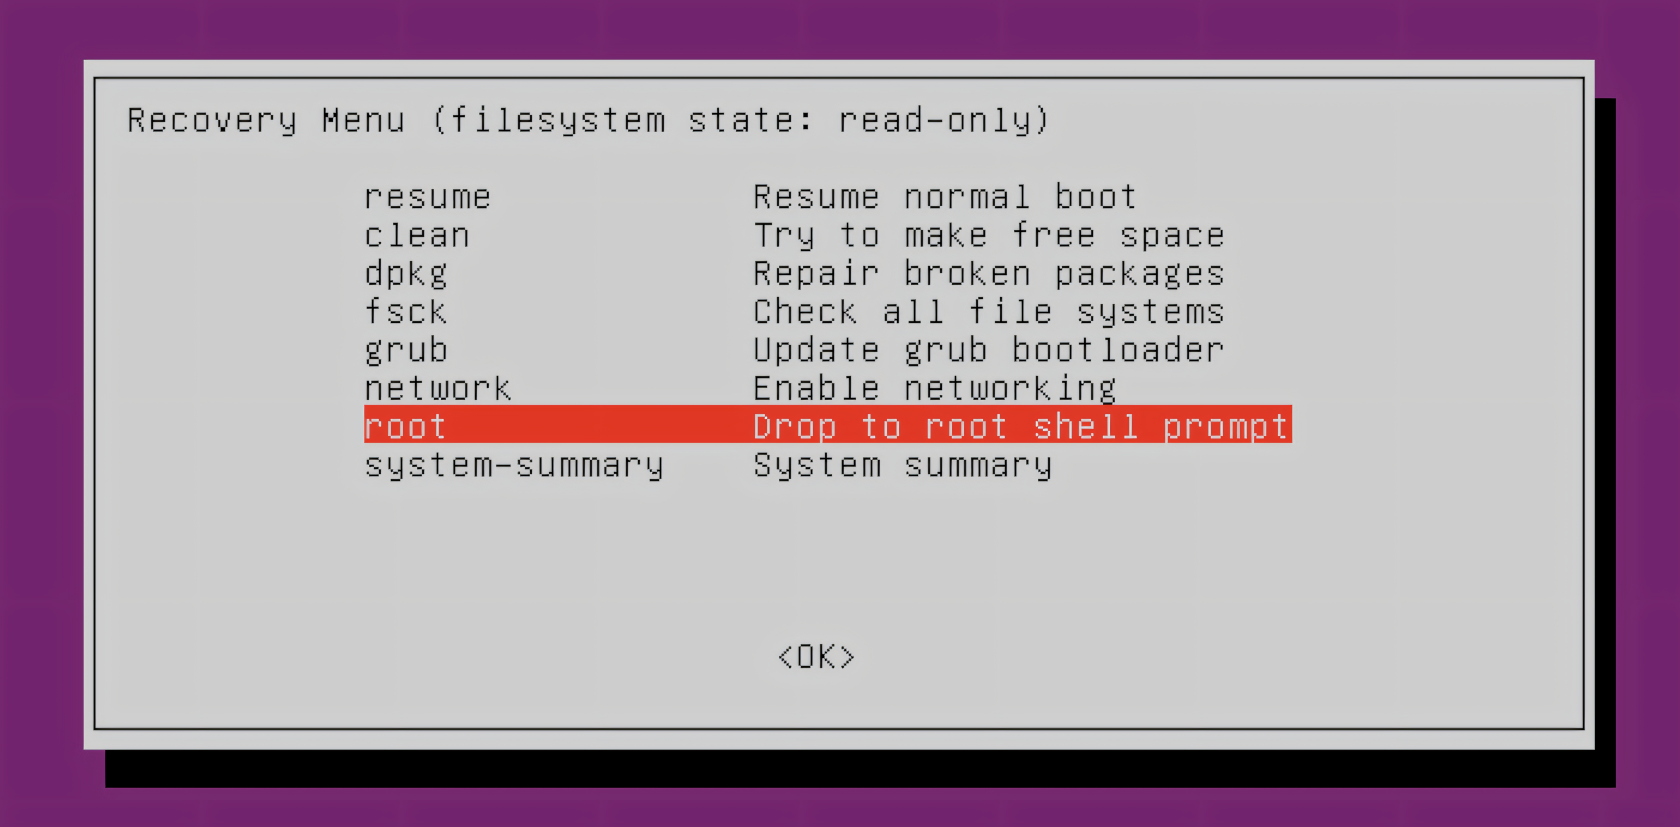 Grub system recovery menu with "Drop to root shell prompt" highlighted 